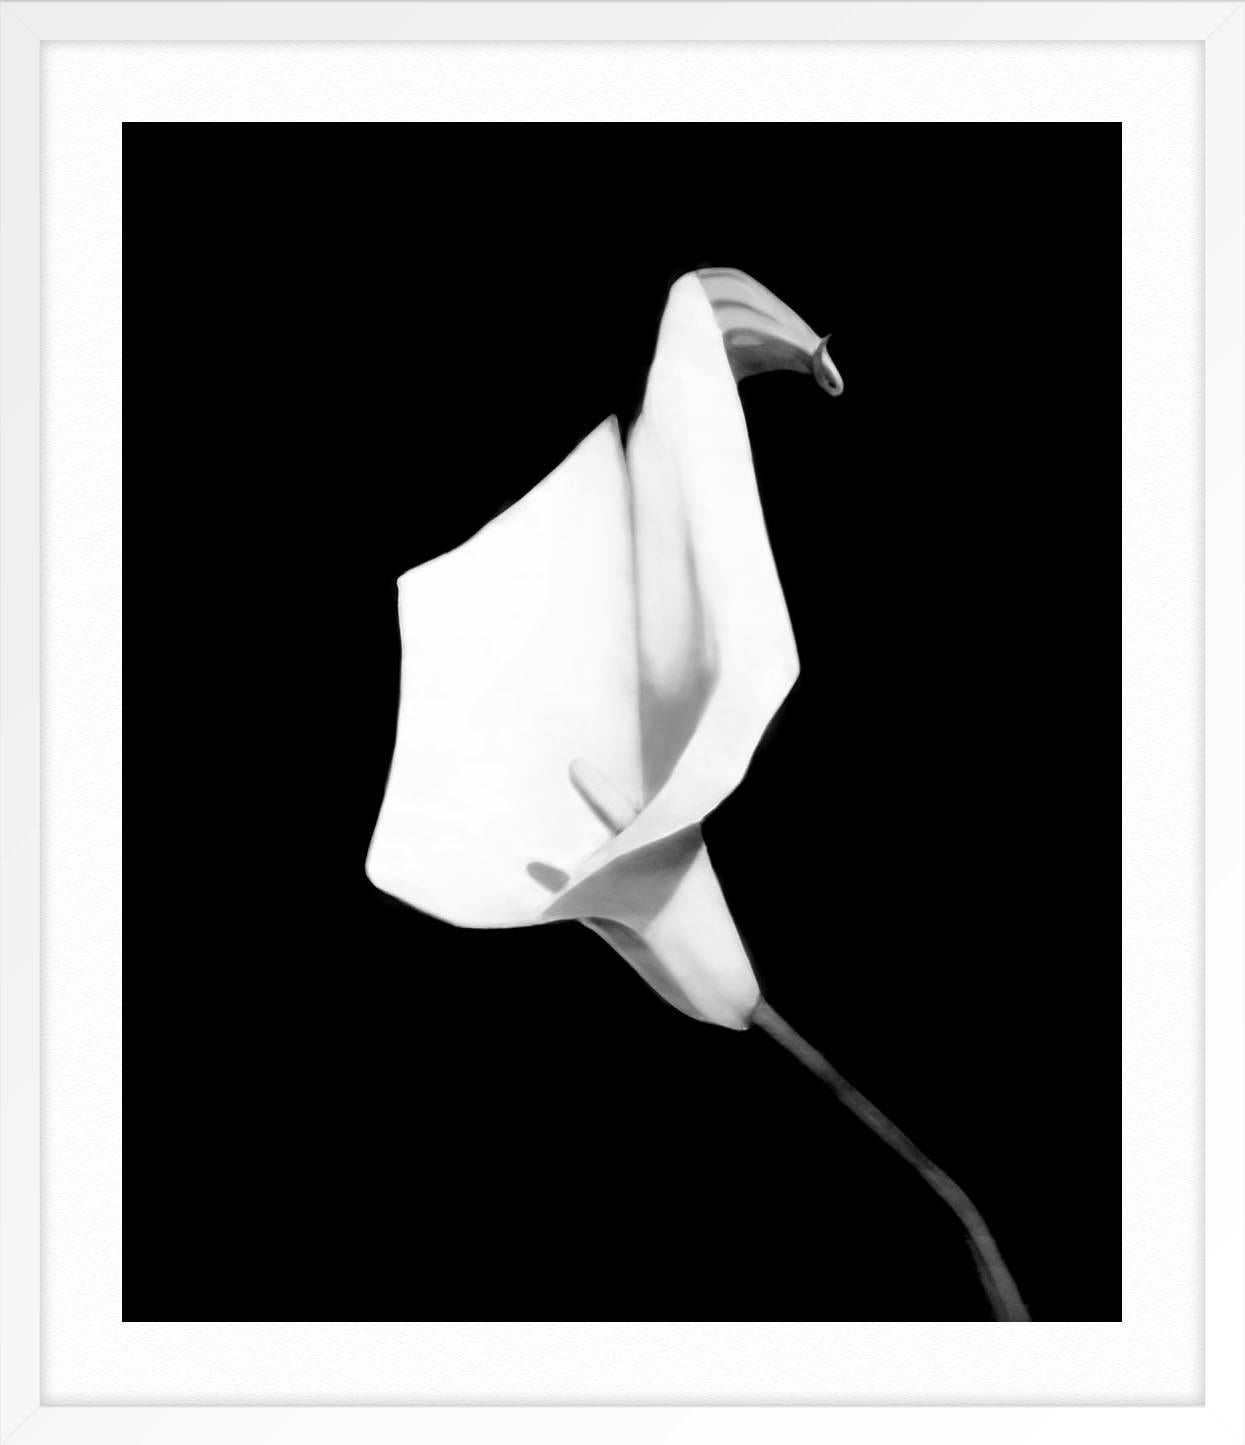 ABOUT THIS PIECE: This painting is based off of Robert Mapplethorpe's Flower series while expanding and adding to the theory and concepts of appropriation by using iconic contemporary photography as my source material. My intention is to allow the